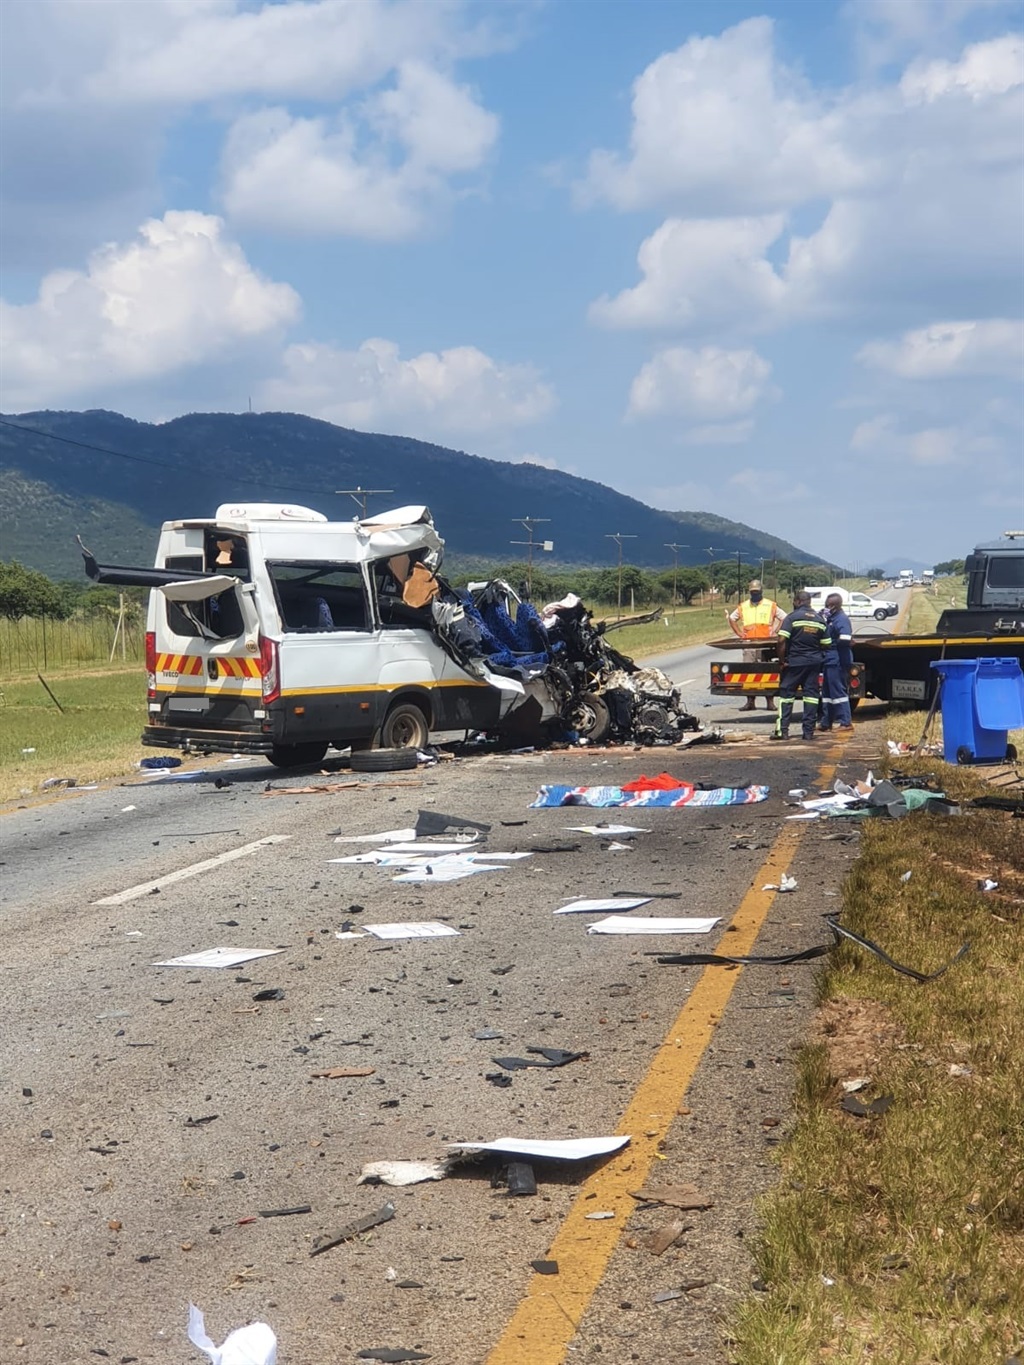 A horrific accident where a 22-seater taxi and a truck collided head on. 